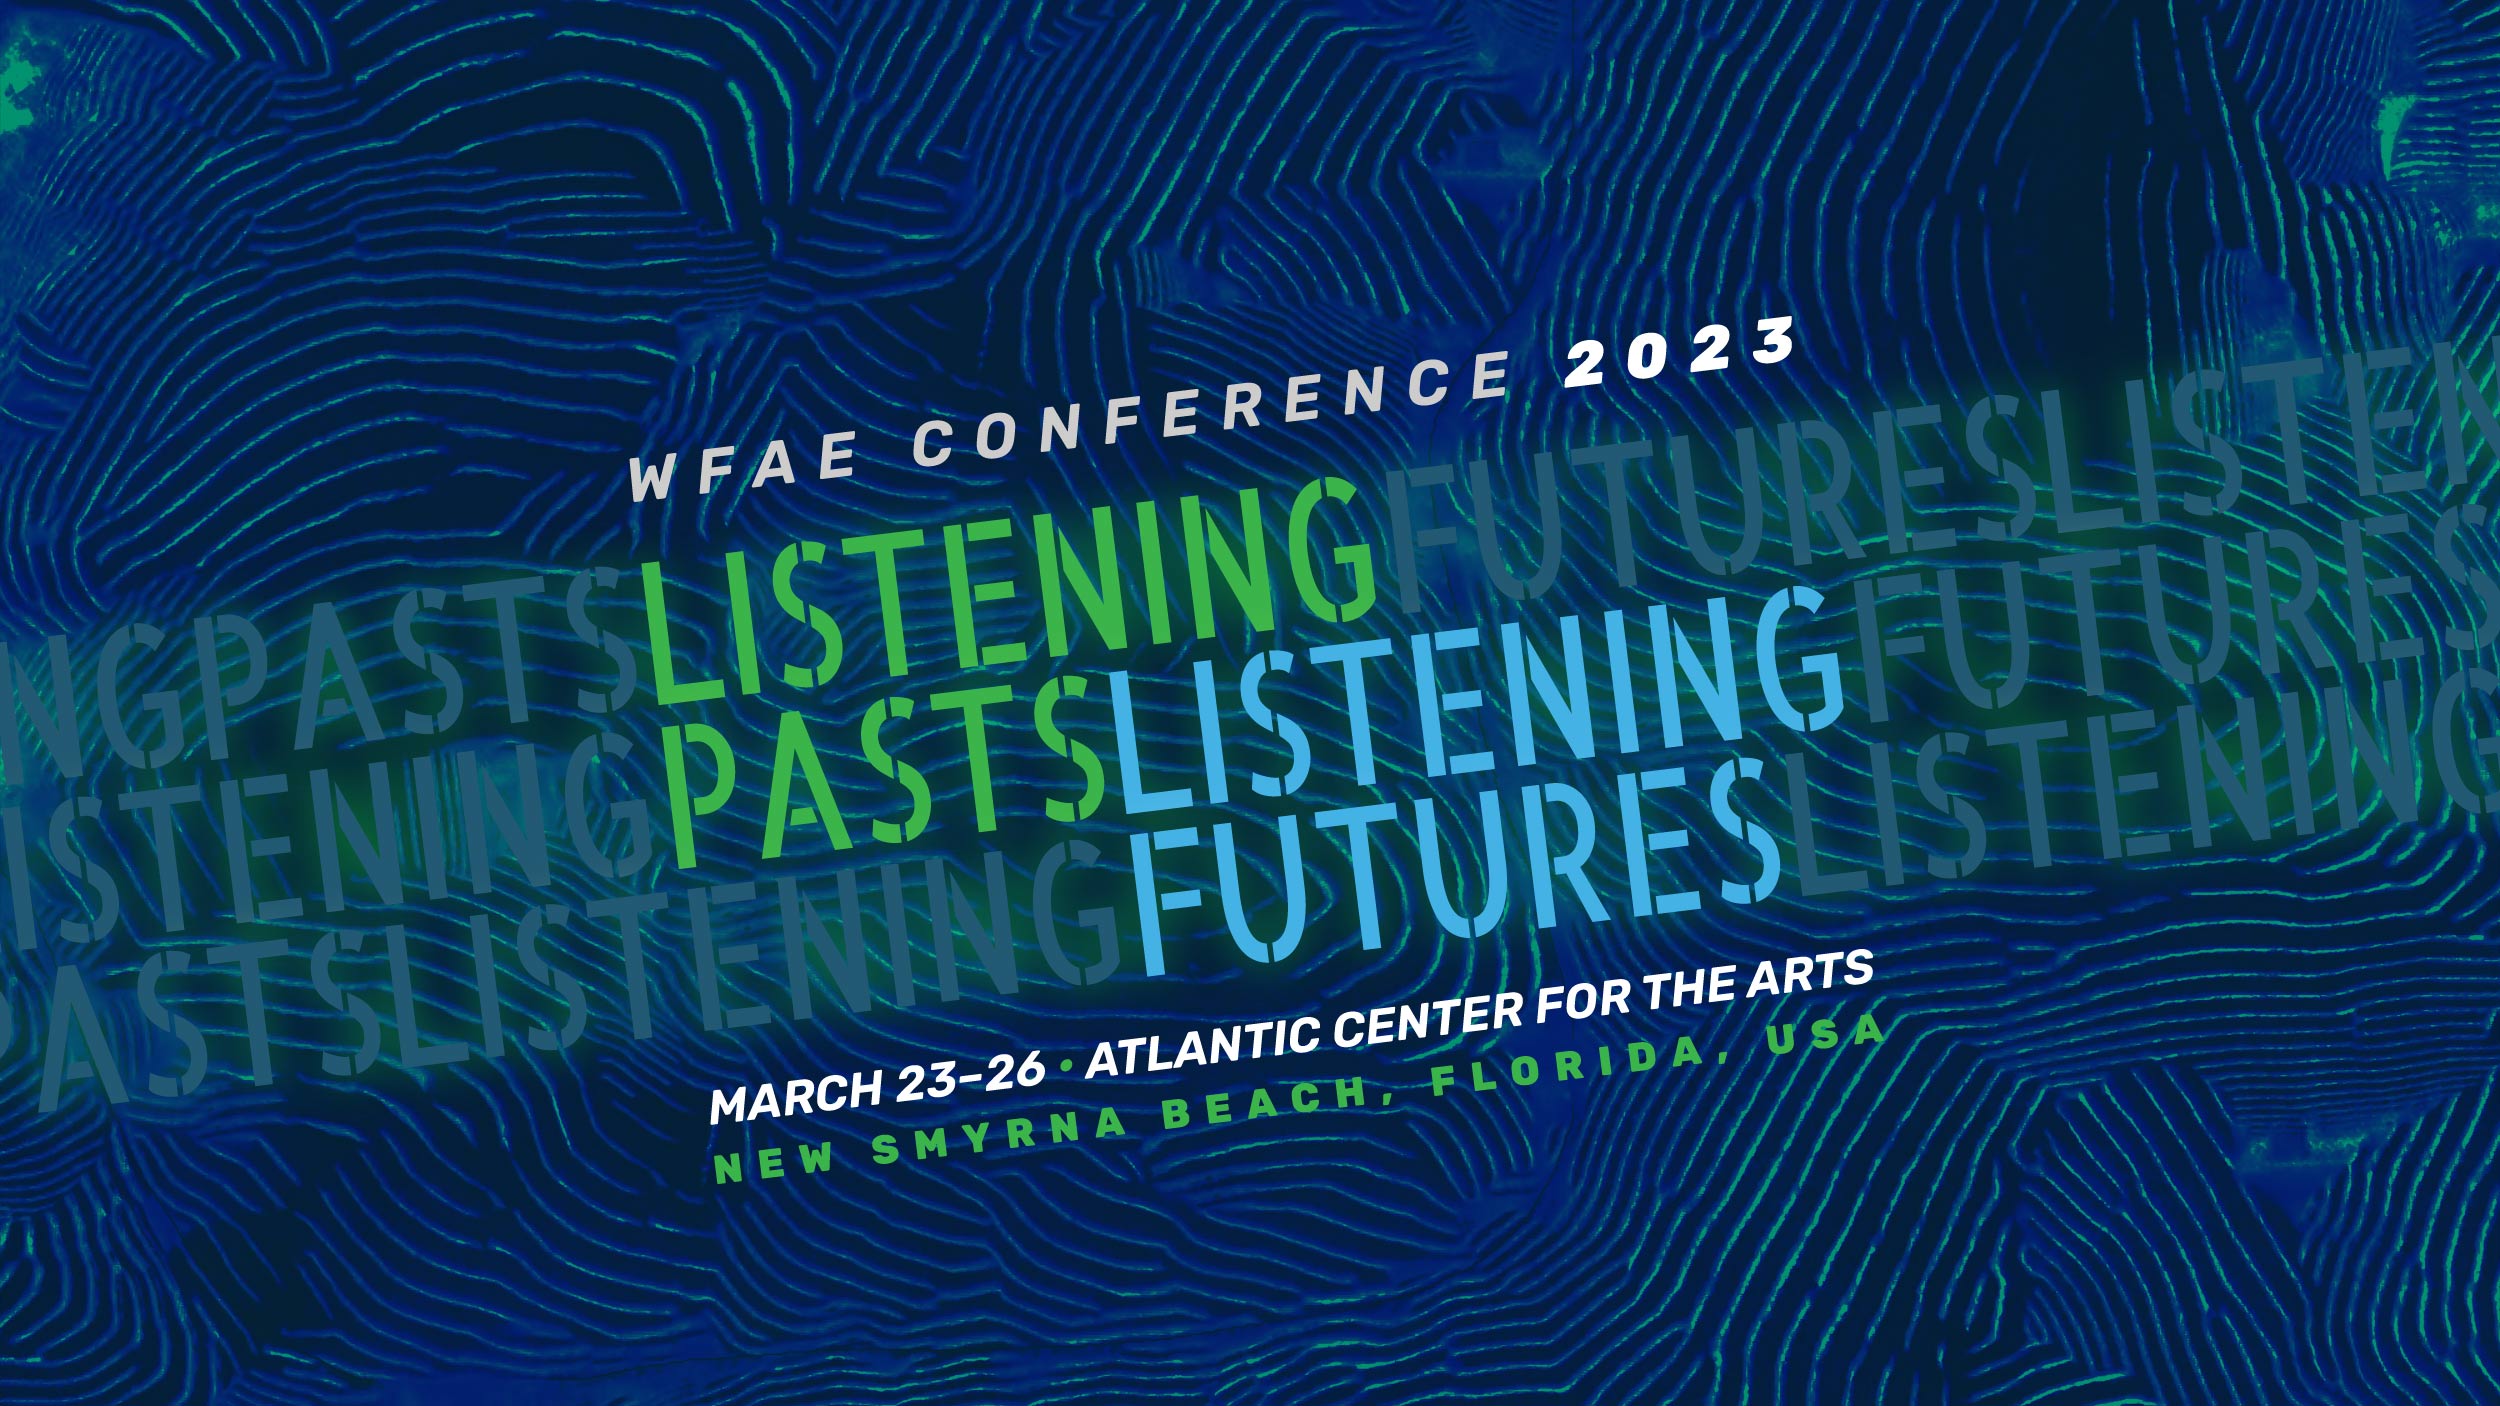 WFAE 2023 Conference Registration is Now Open